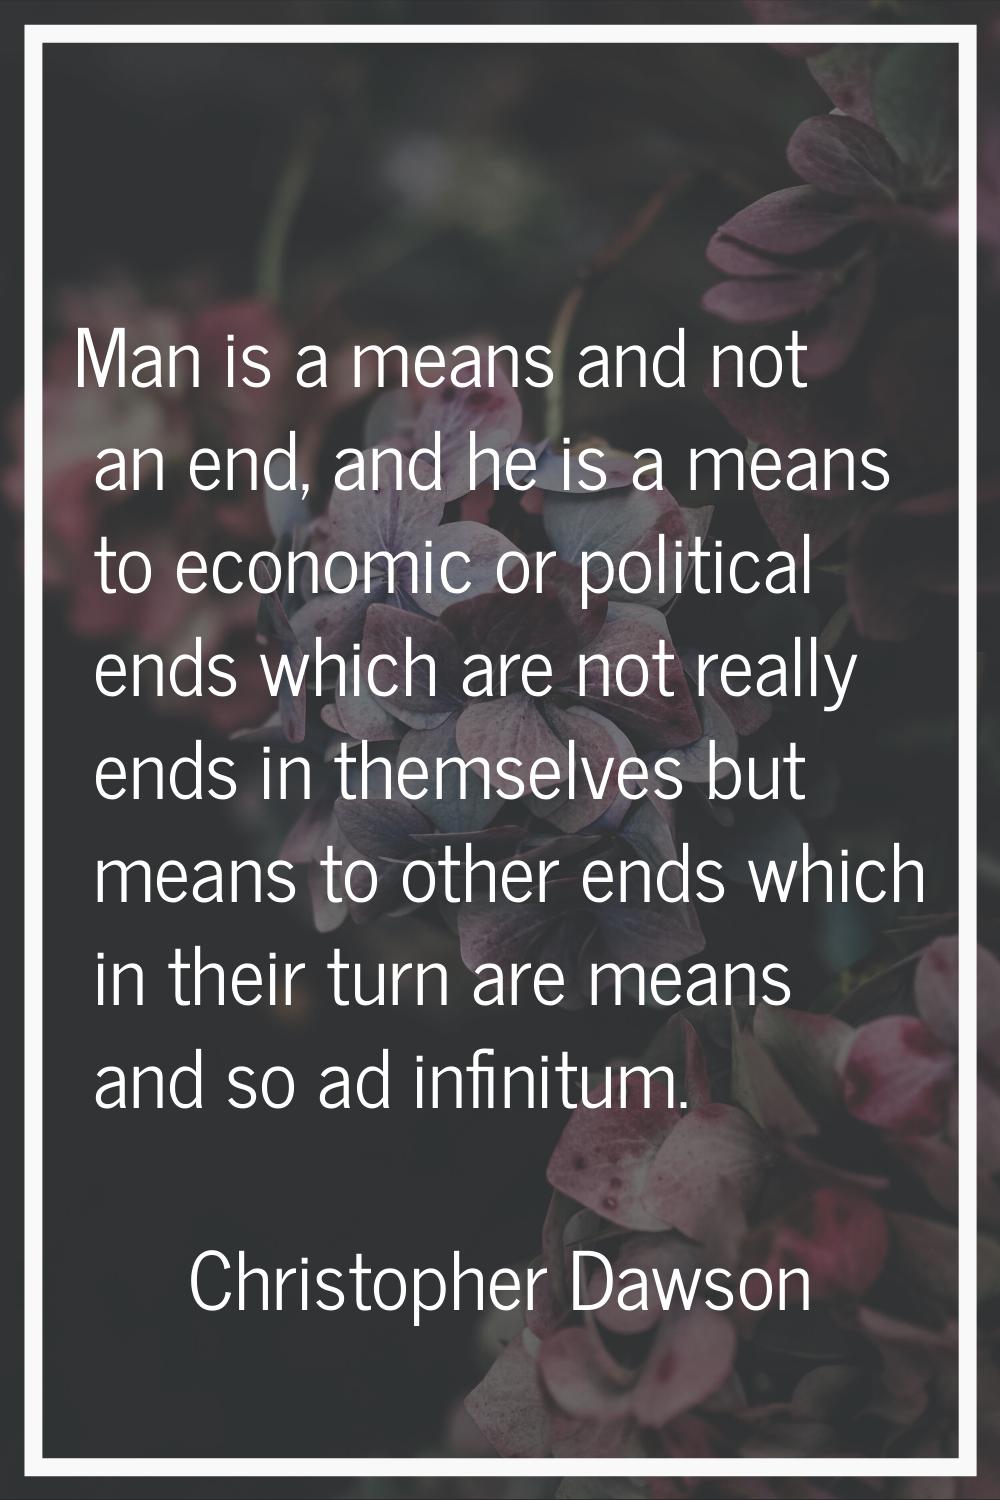 Man is a means and not an end, and he is a means to economic or political ends which are not really